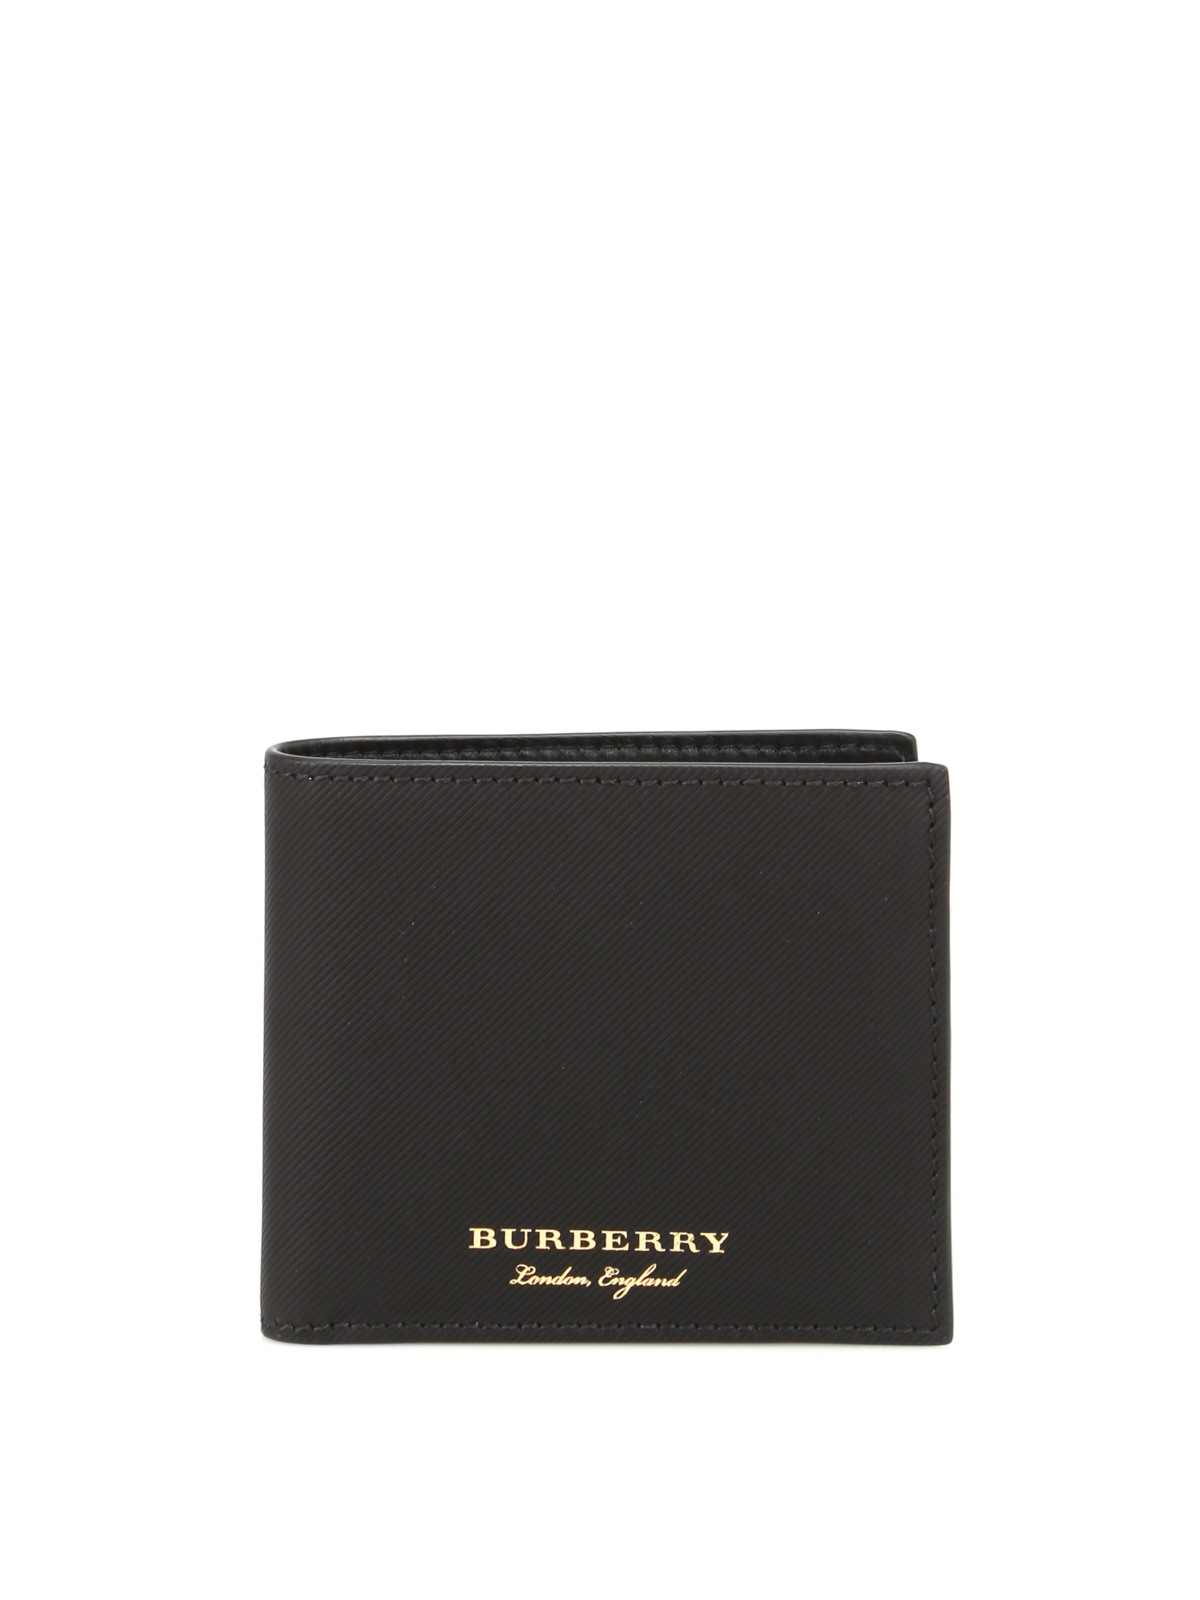 Wallets & purses Burberry - Trench leather continental wallet -  4054781REGCCBILLBLACK